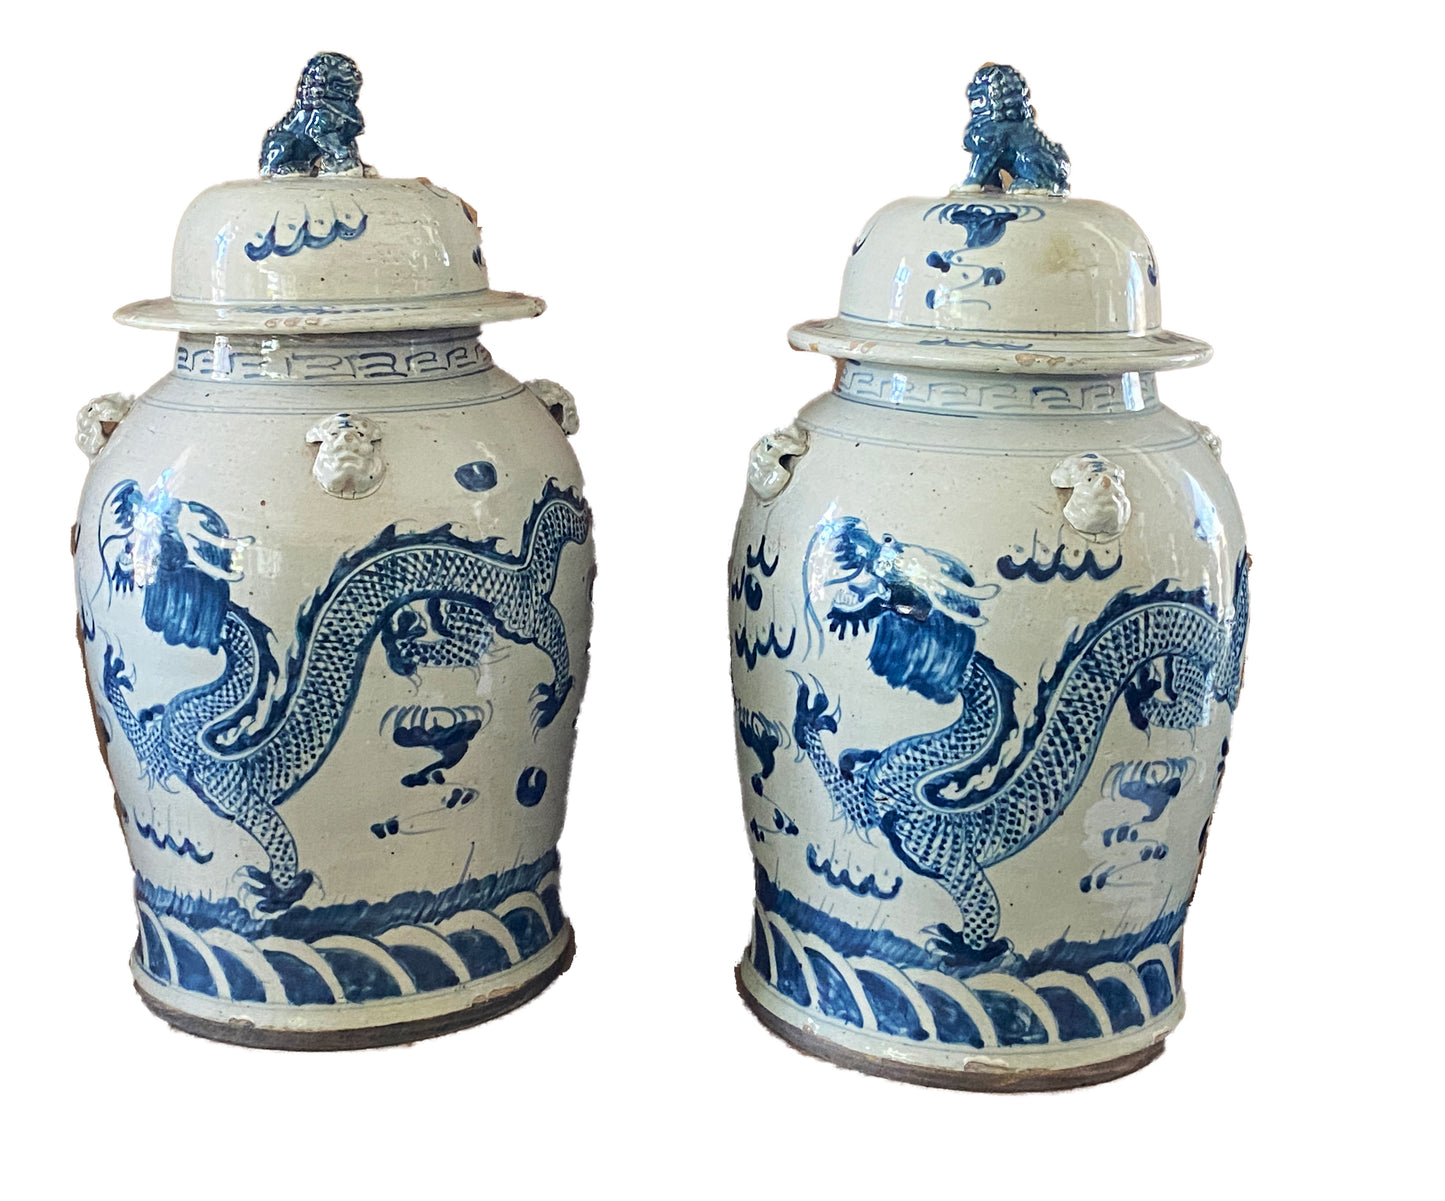 #3162 Large Chinoiserie Dragons Ginger Jars pair 24" H